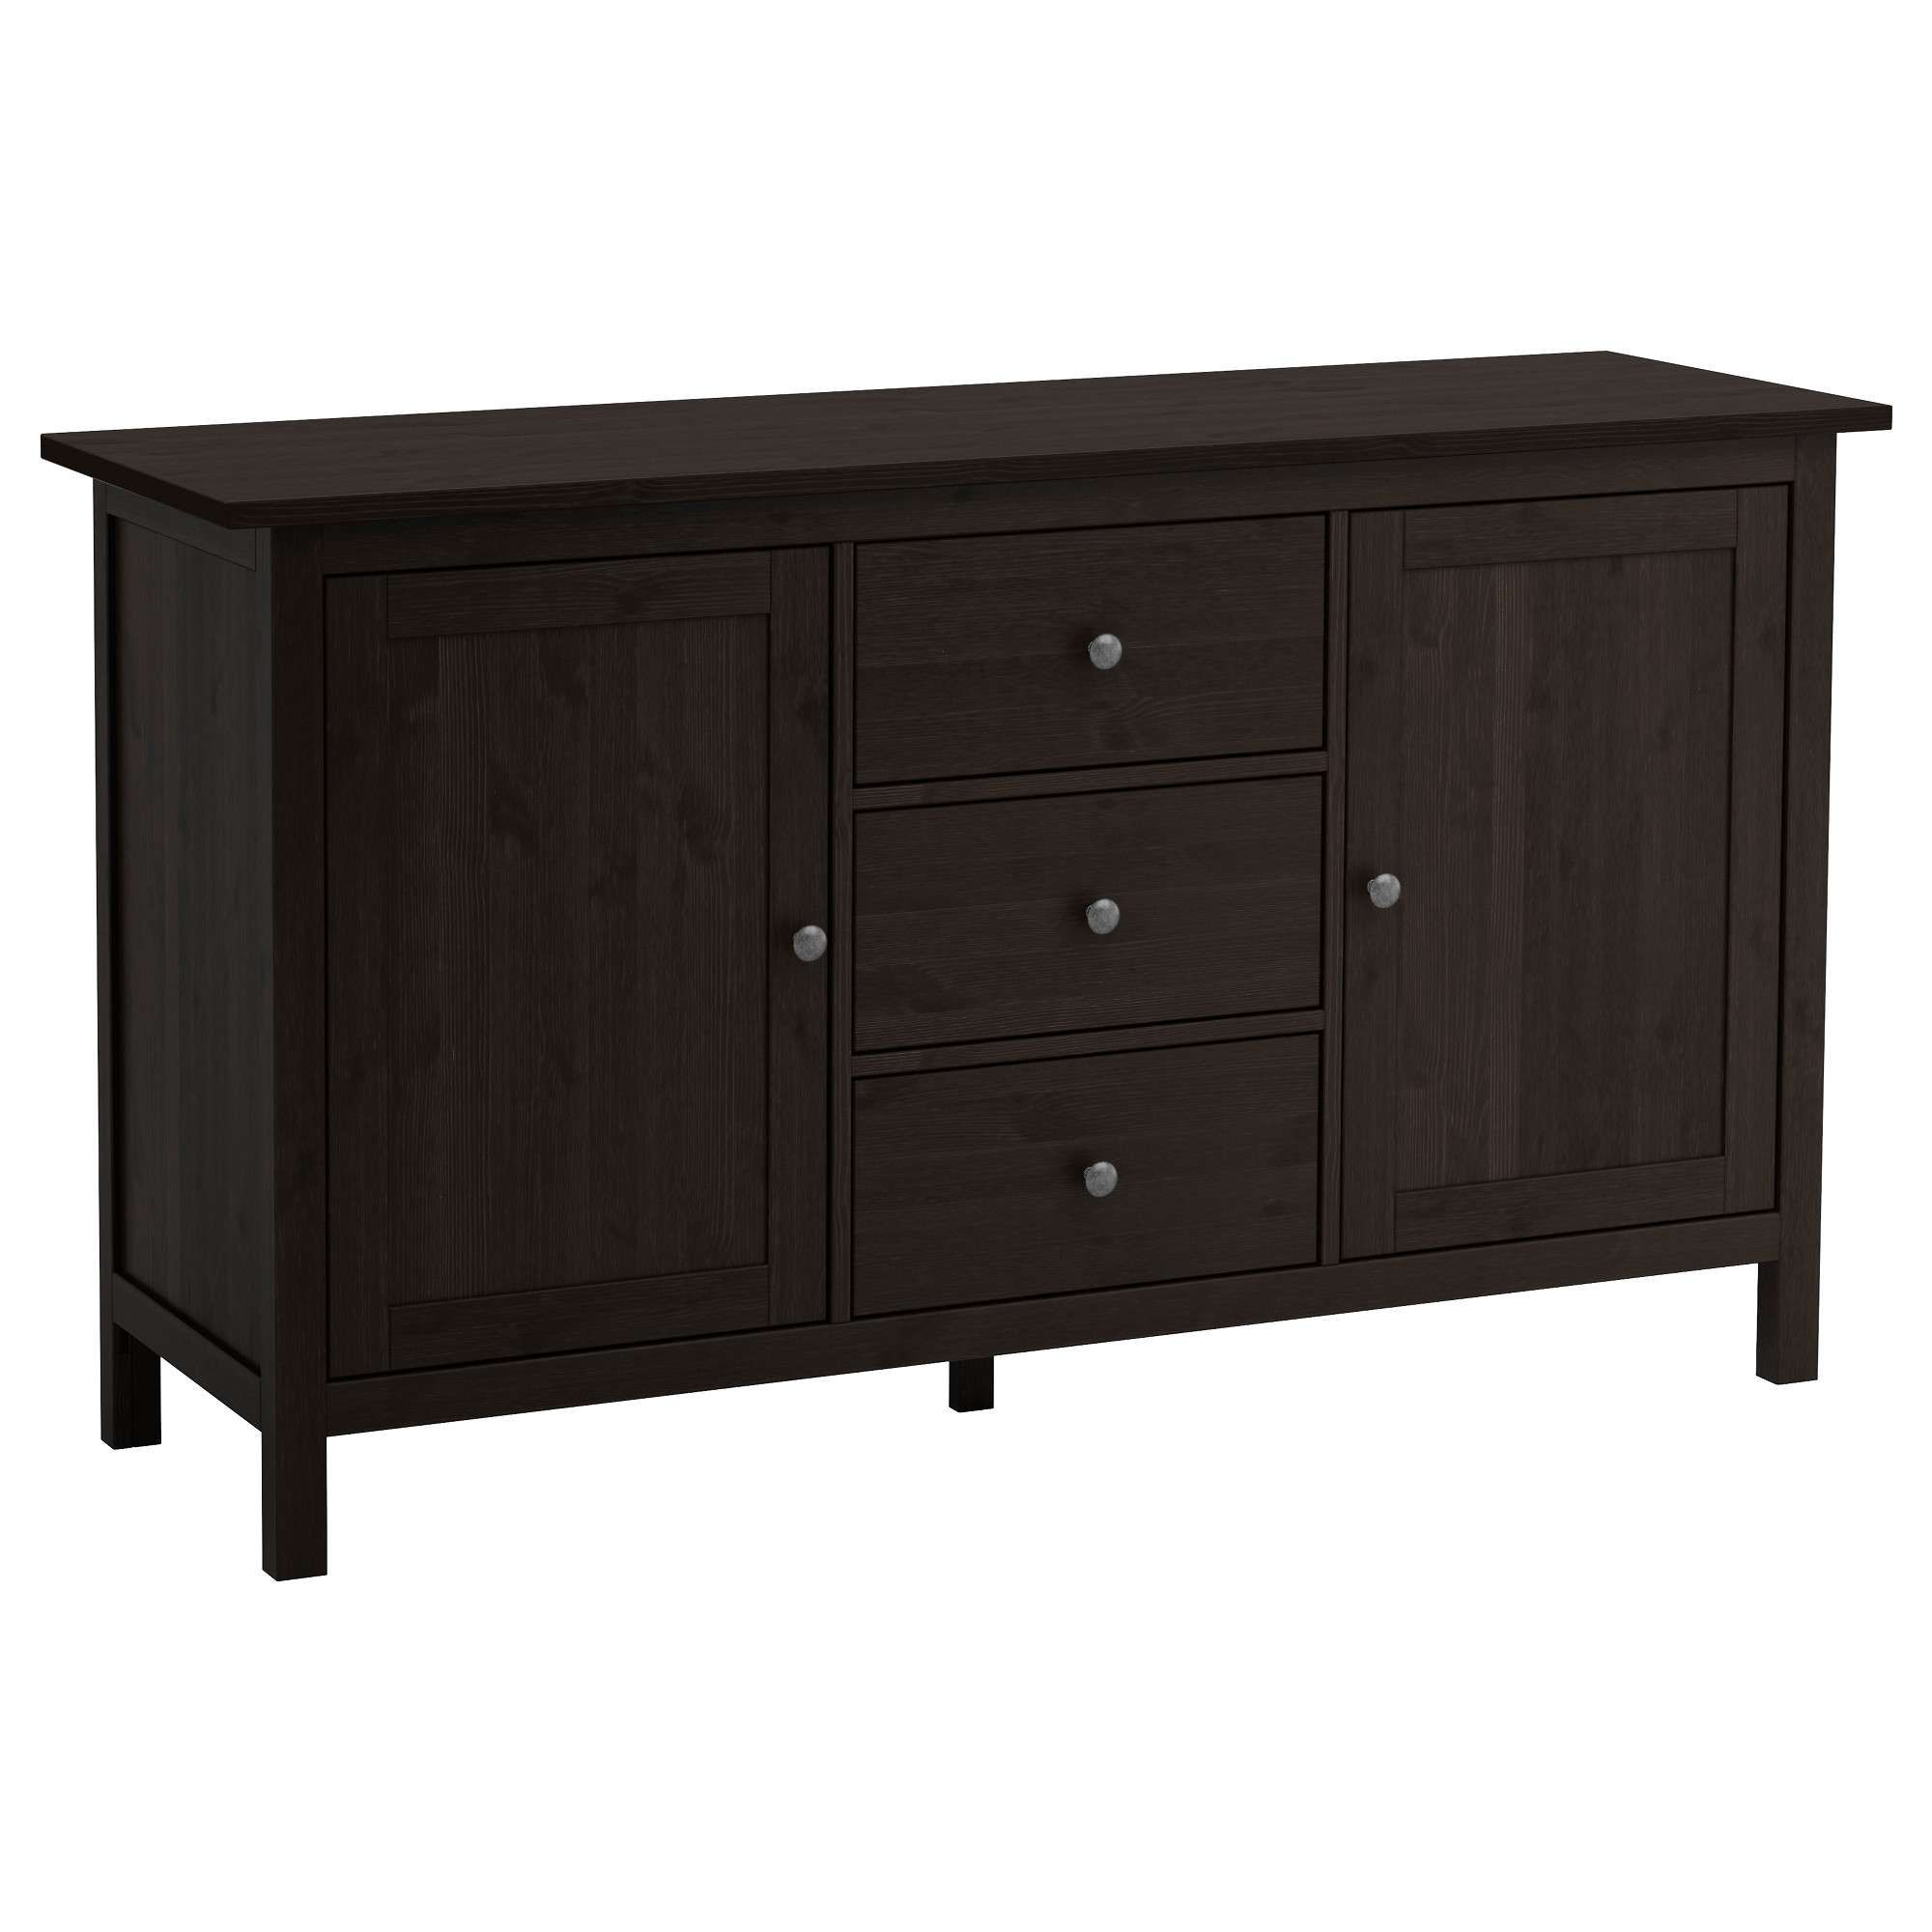 Hemnes Sideboard – Black Brown – Ikea With Shallow Buffet Sideboards (View 4 of 20)